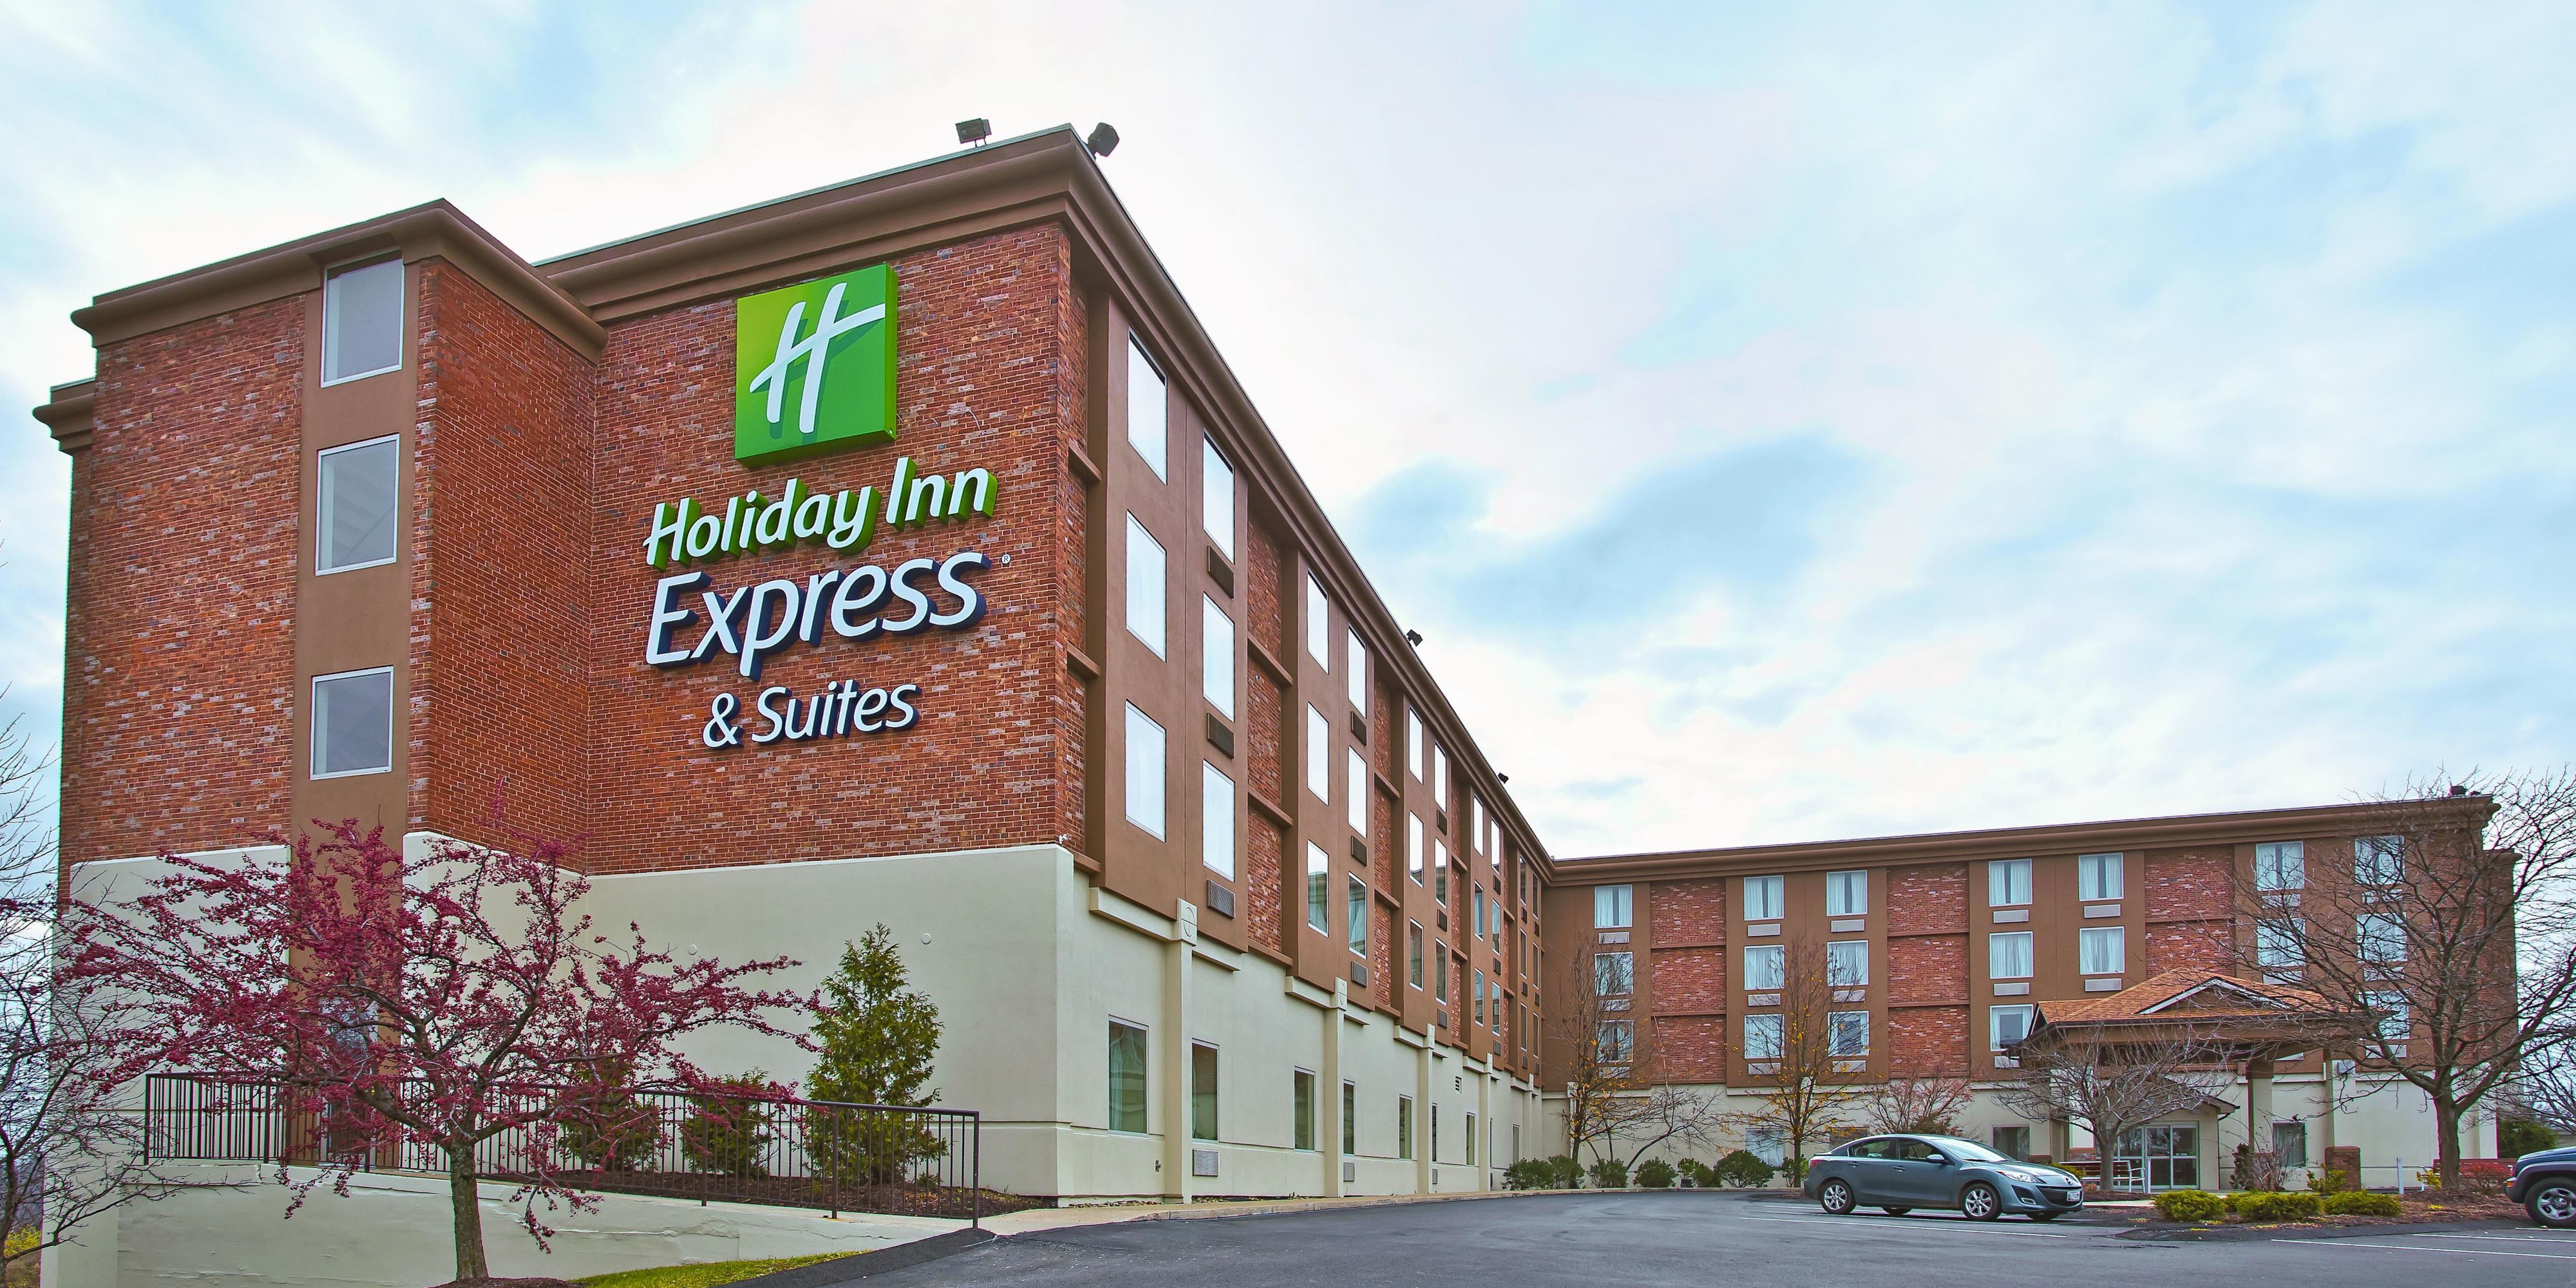 Photo of Holiday Inn Express & Suites Pittsburgh West Mifflin, West Mifflin, PA